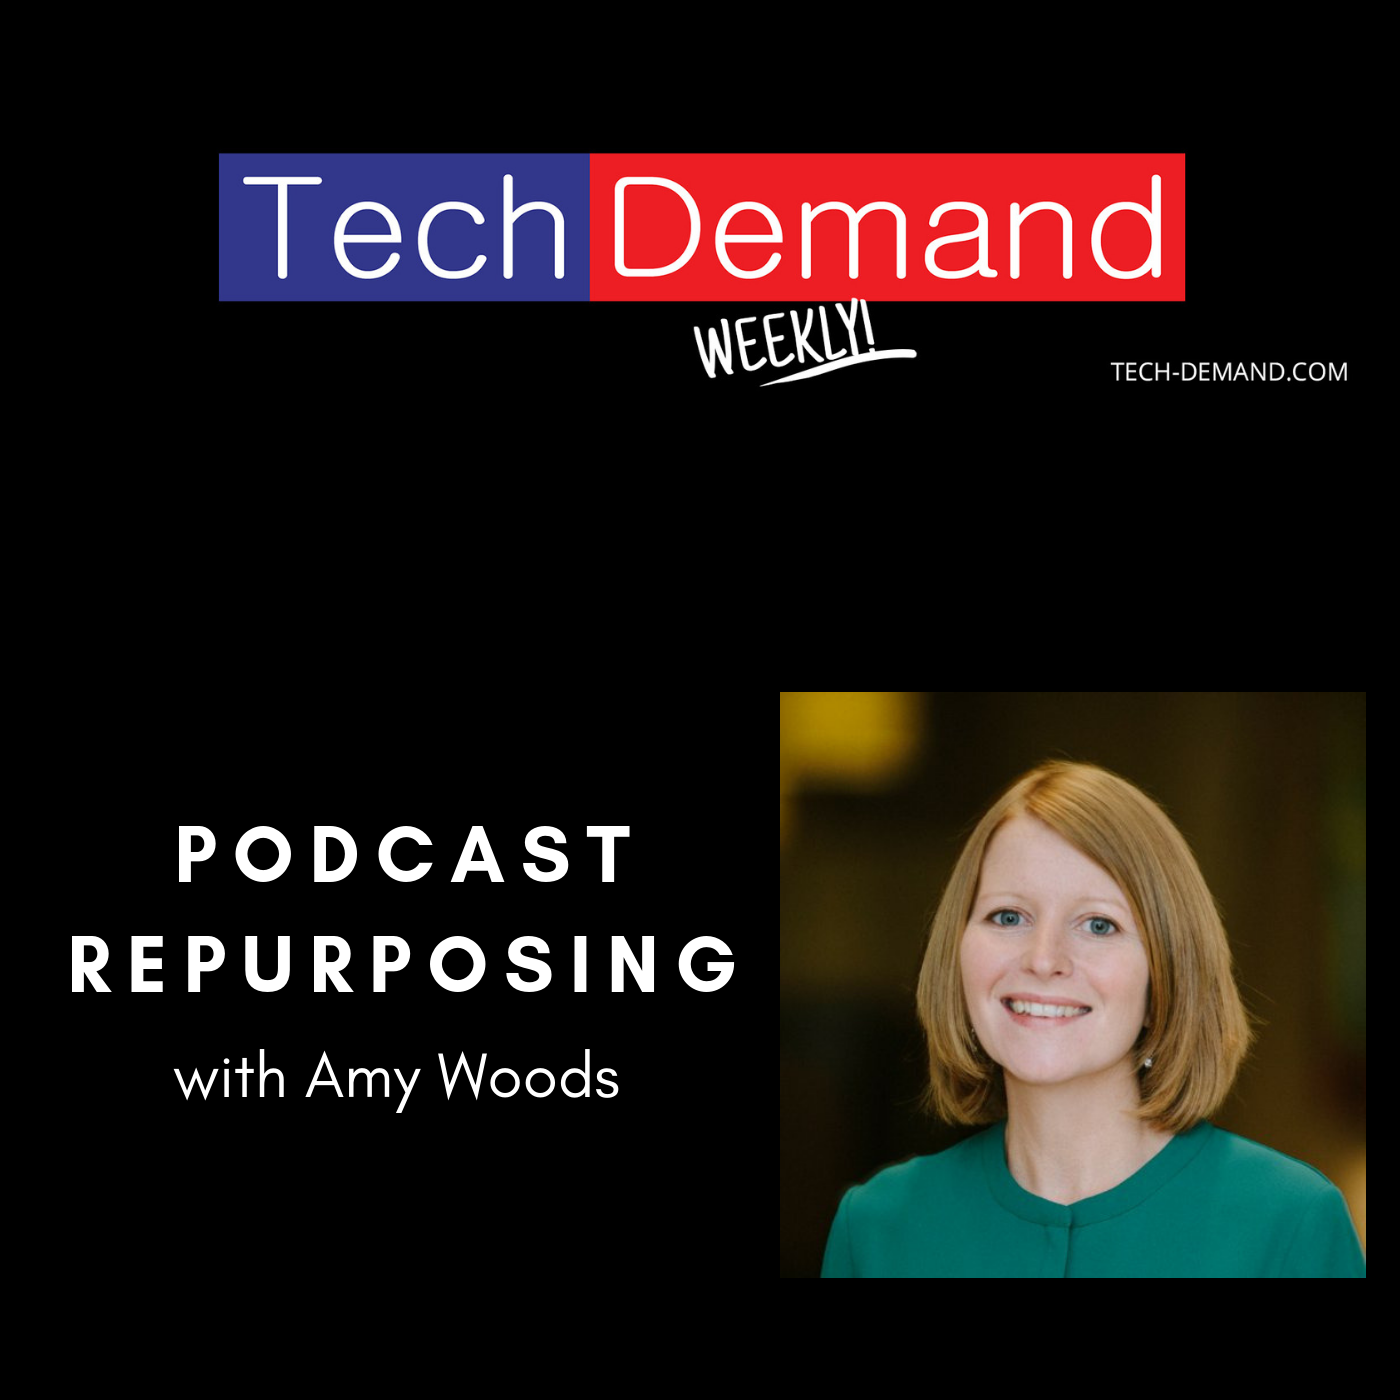 podcast episode artwork with episode title, Tech Demand logo and headshot image of Amy Woods